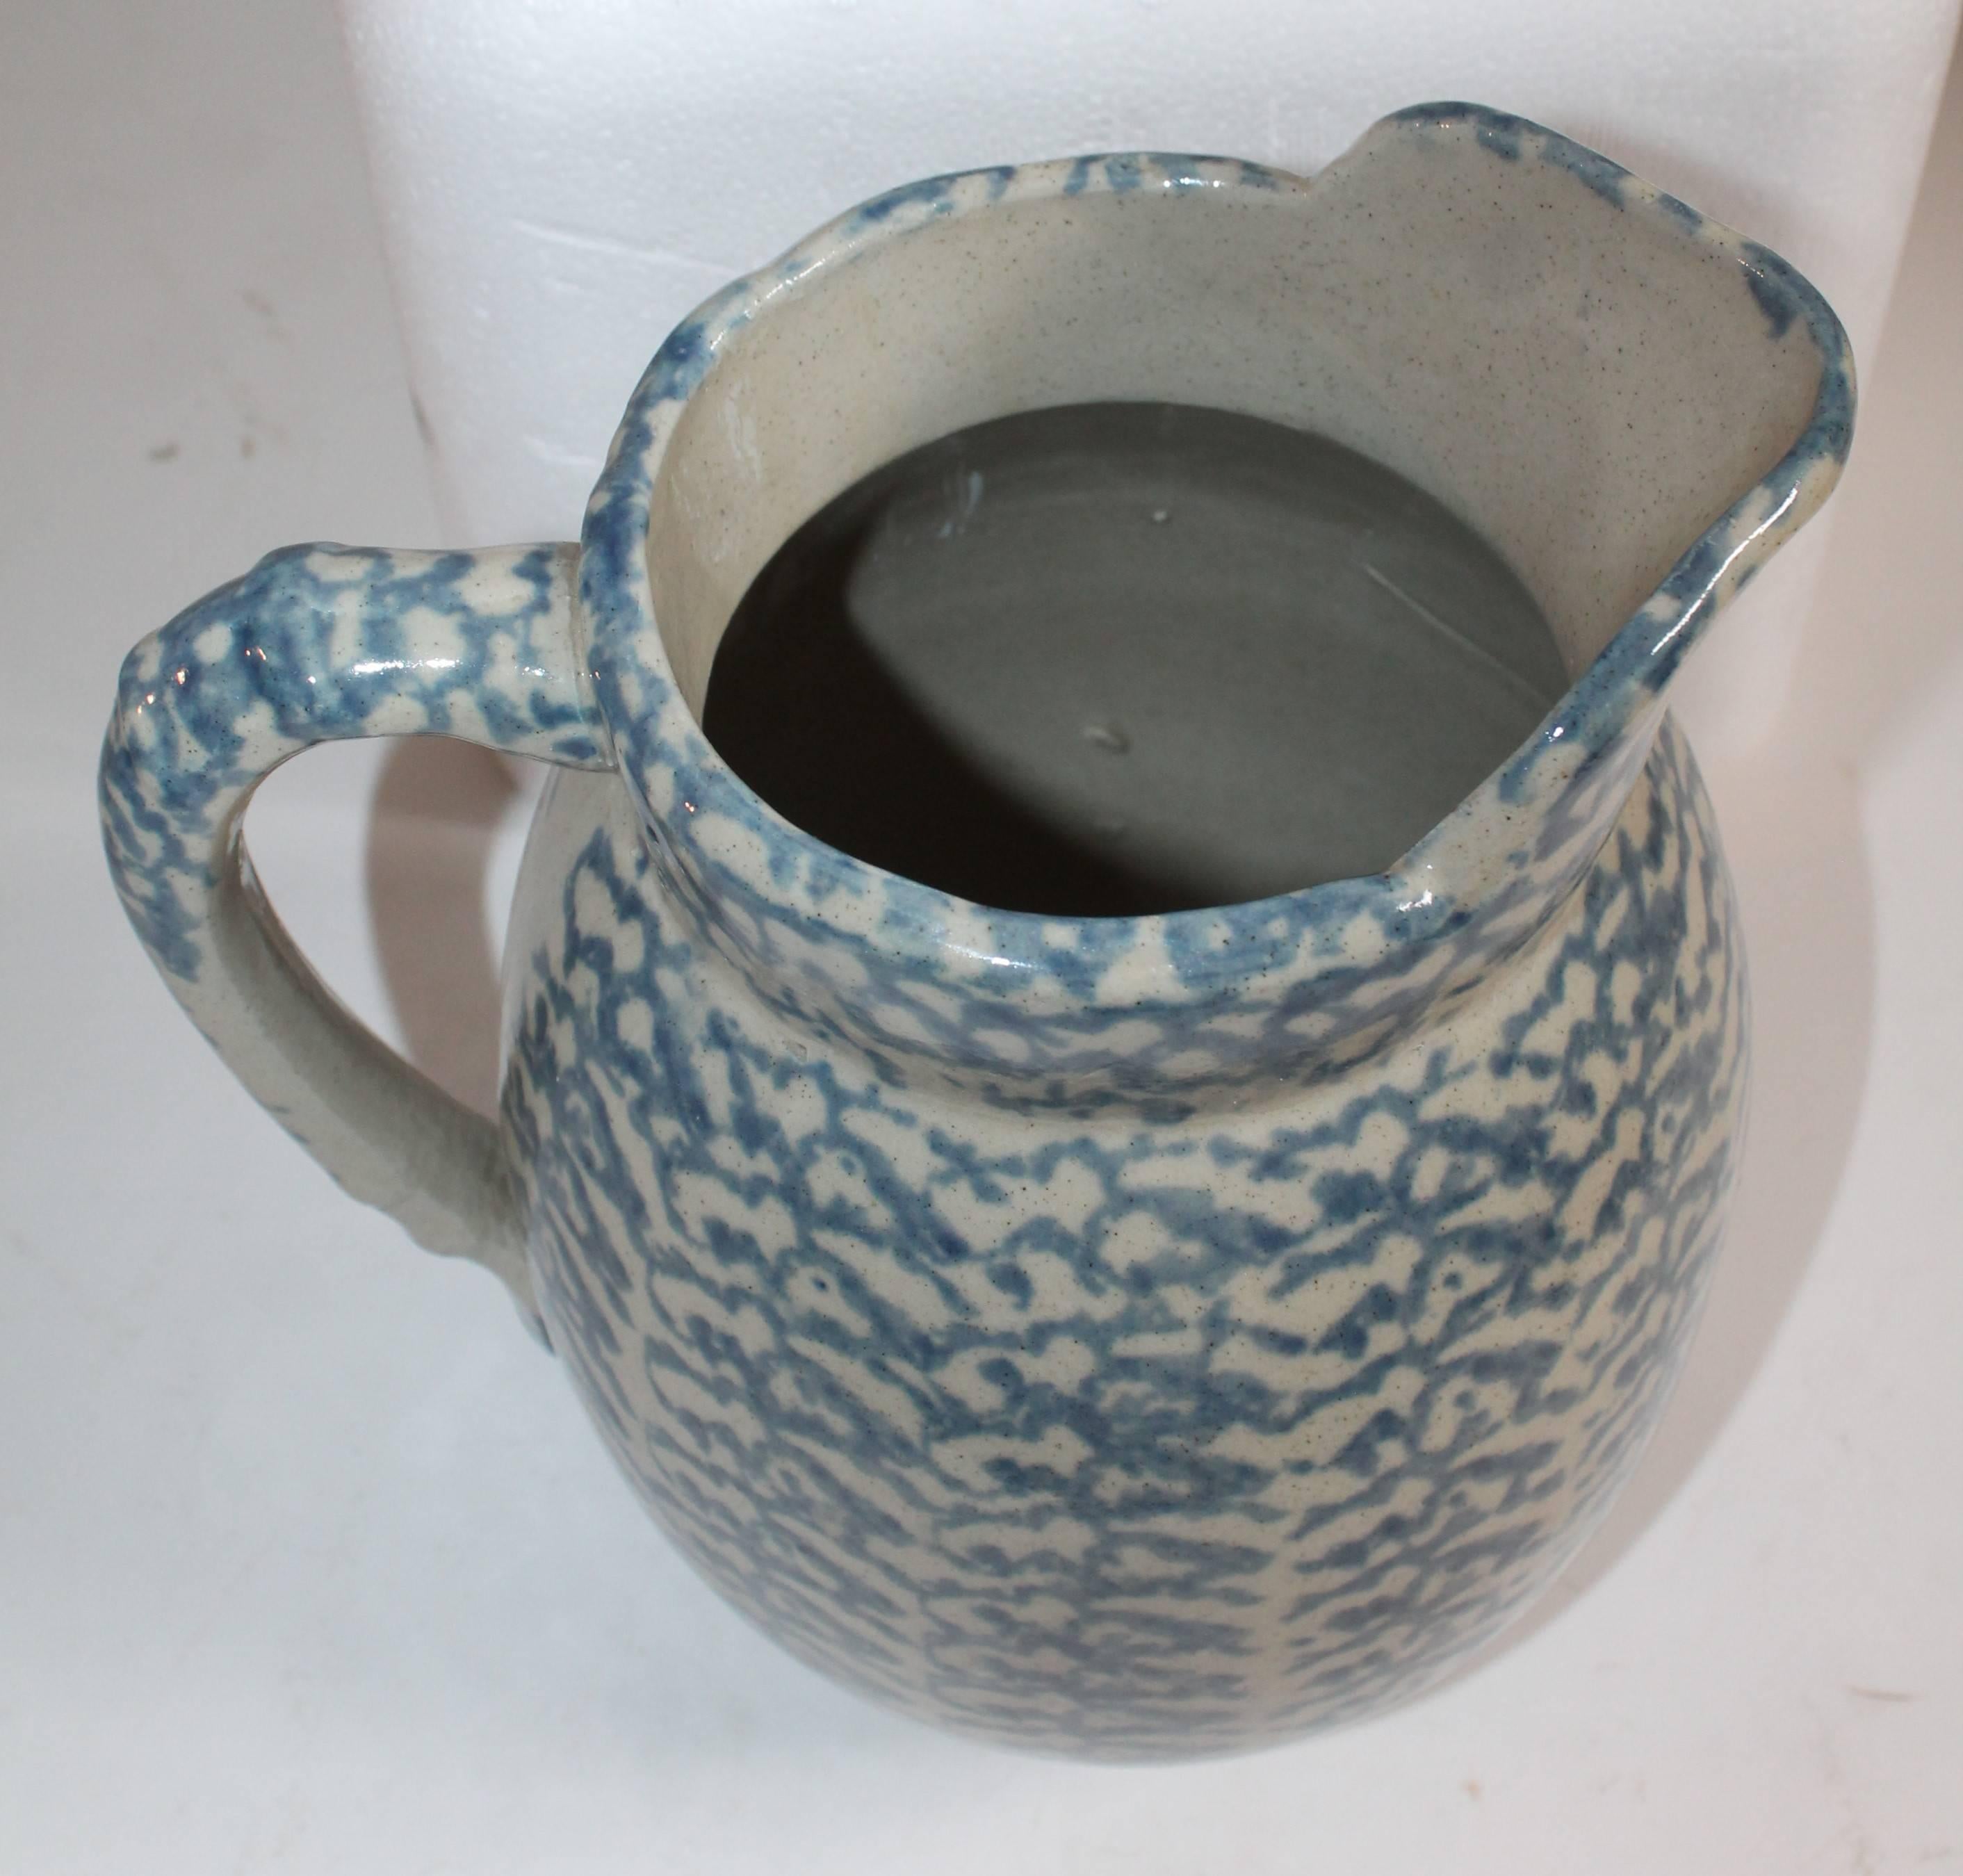 Hand-Crafted 19th Century Sponge Ware Lg. Pottery Pitcher